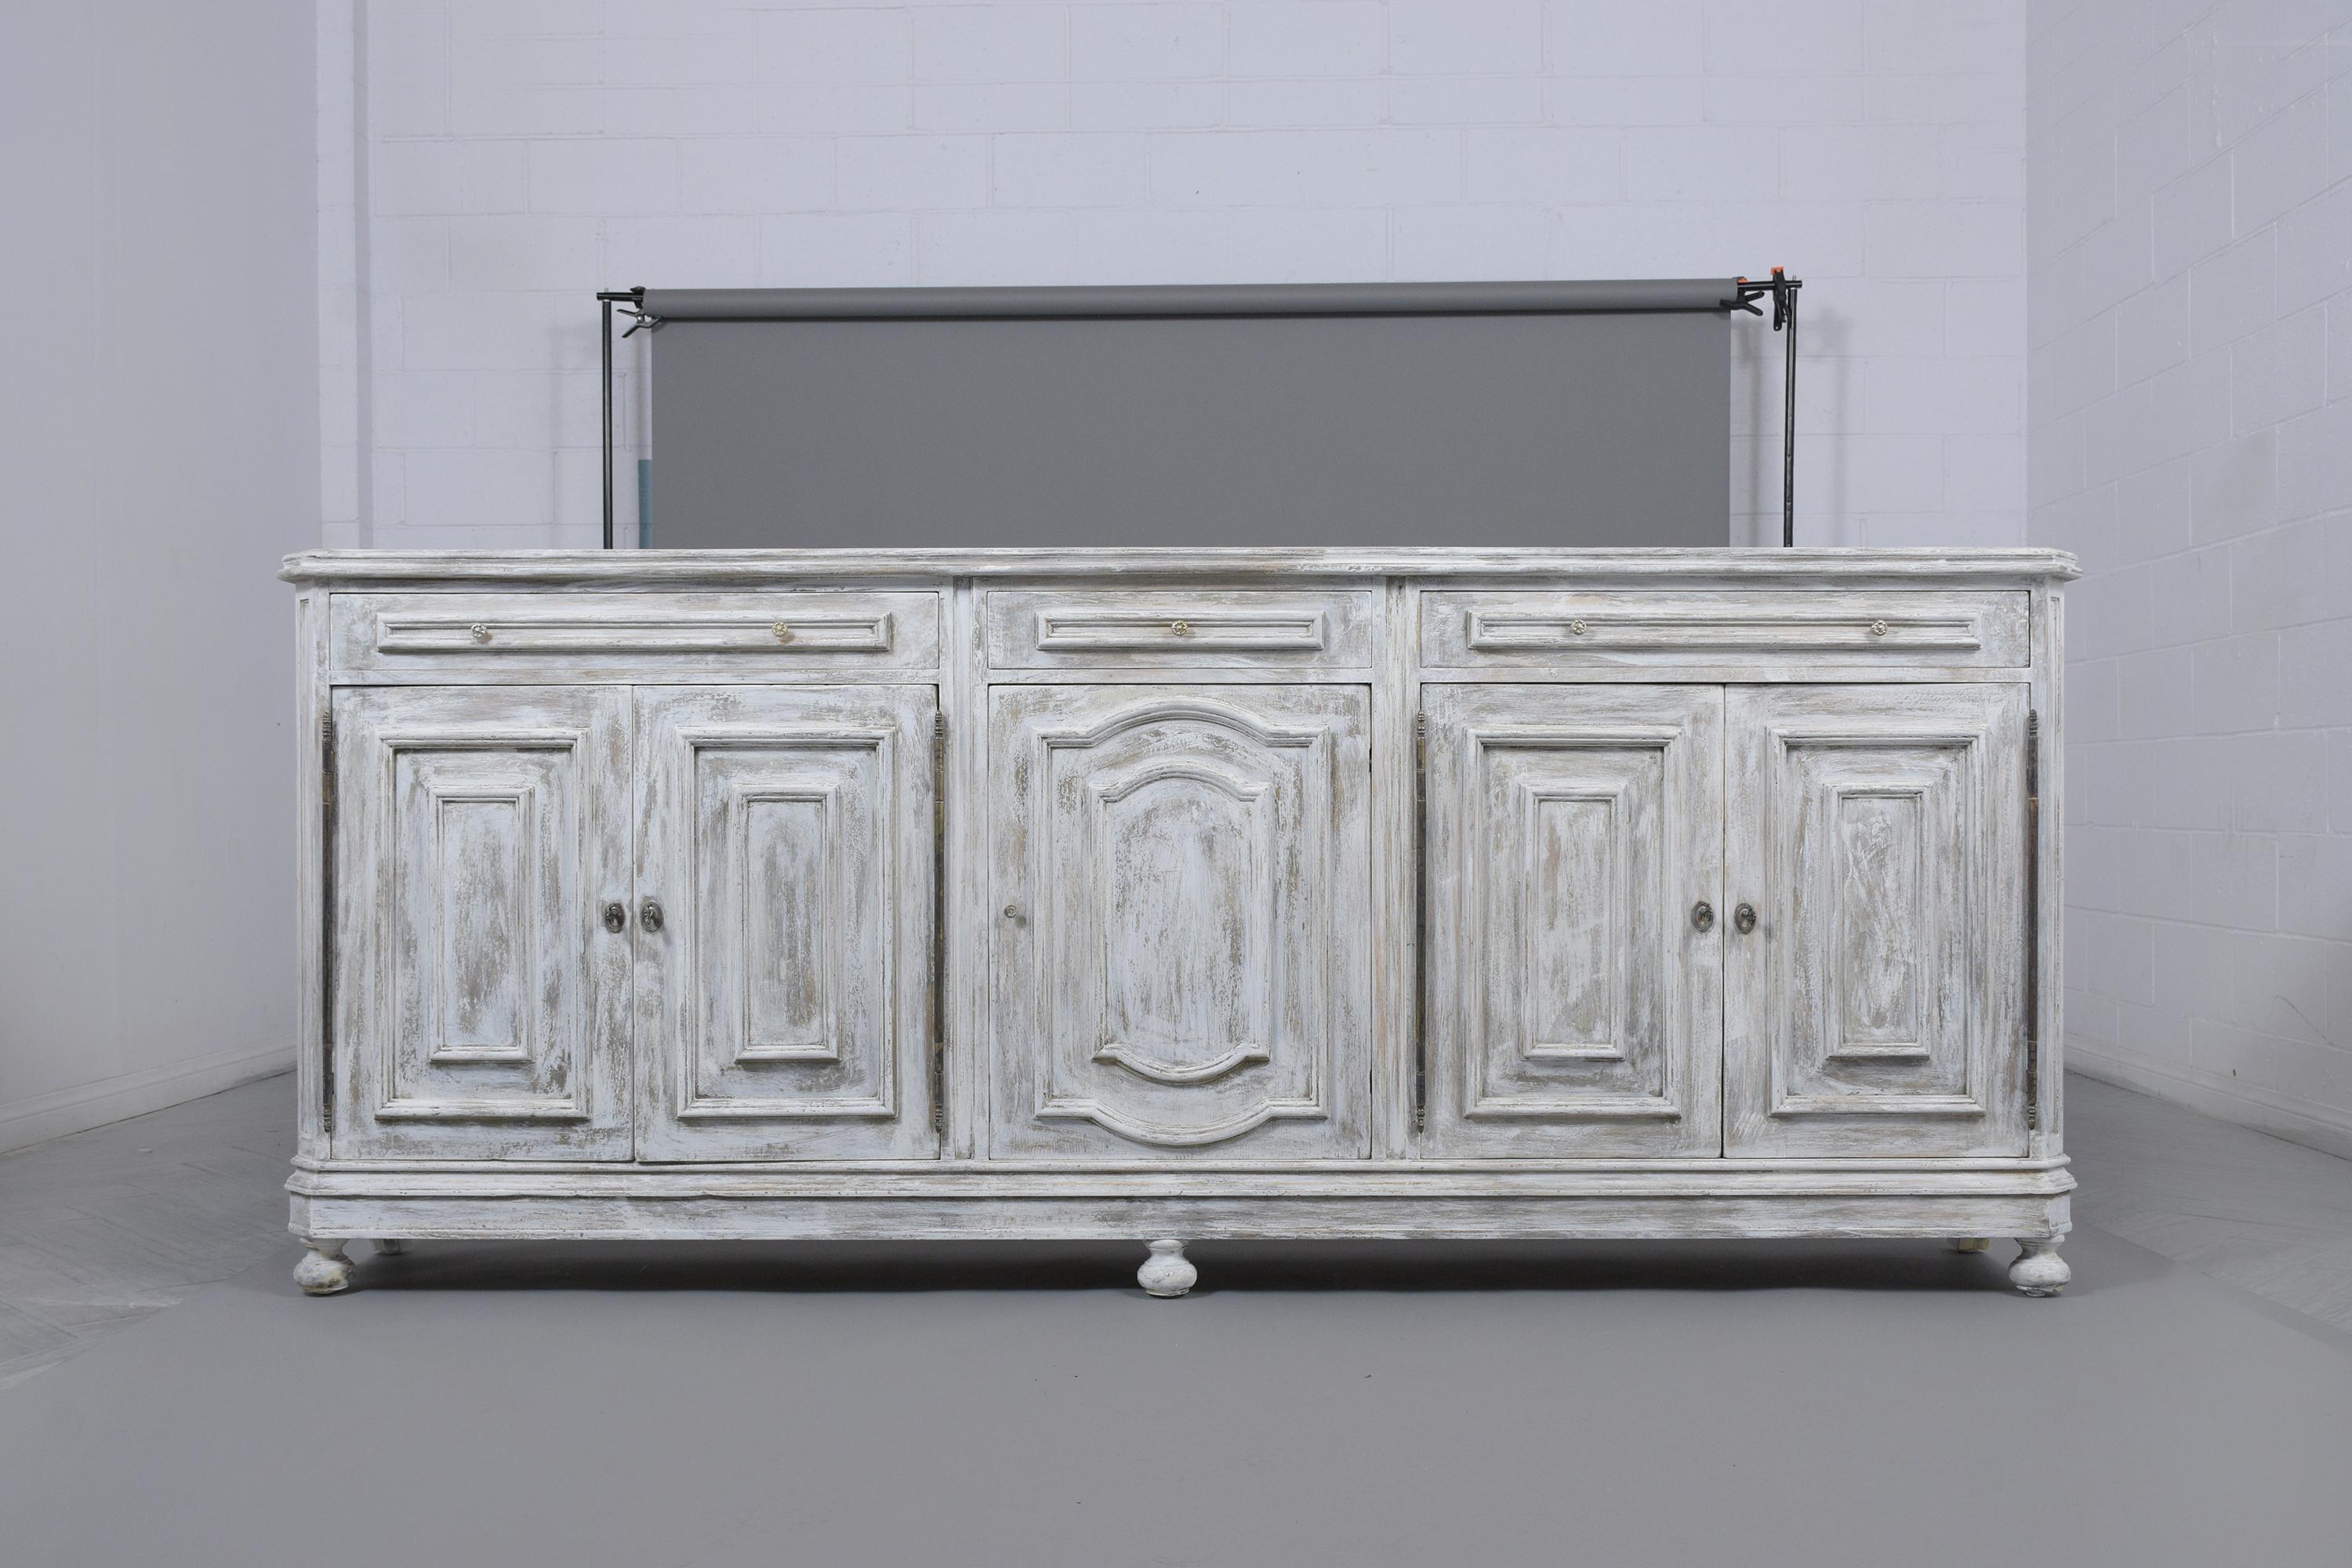 This Italian 1970's baroque-style buffet is hand-crafted out of oak wood, has been newly painted in an off-white and gray color combination with unique distressed finished and has been professionally restored. This server features a marquetry design